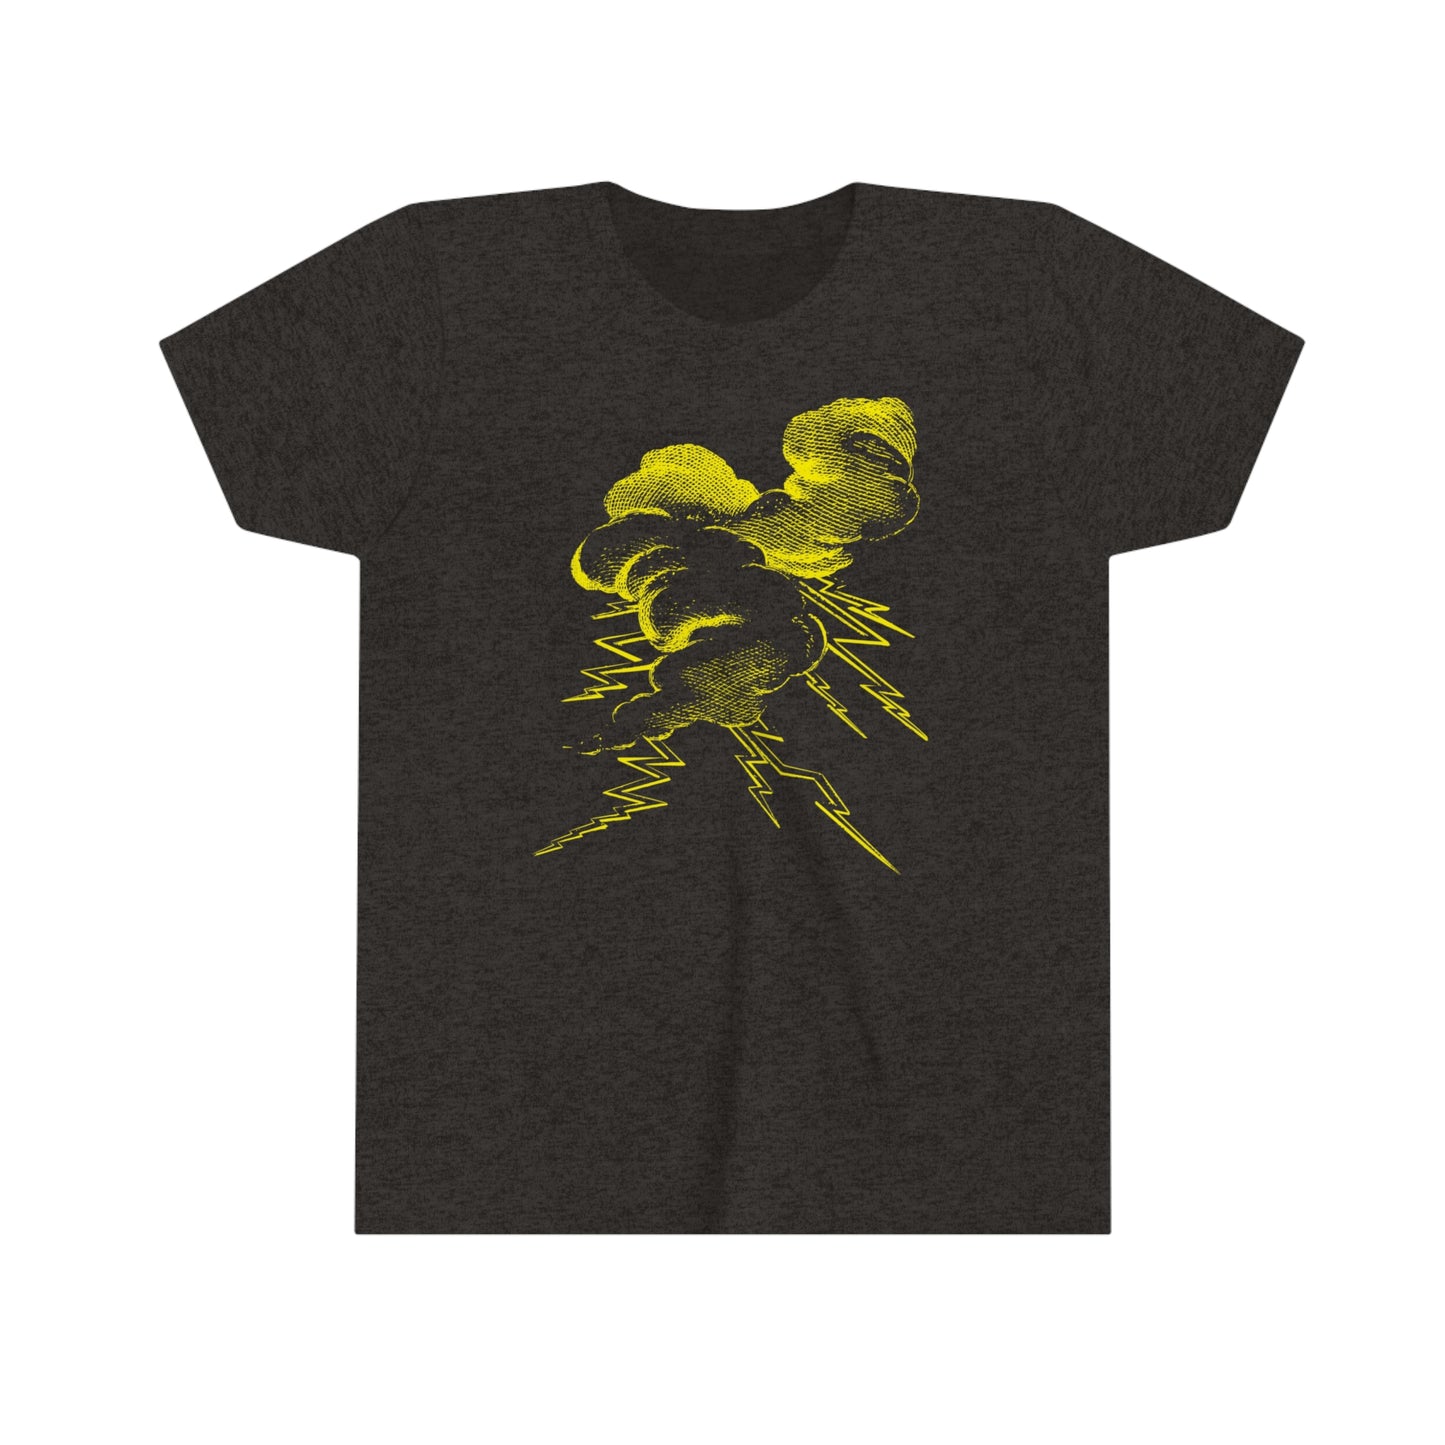 Large Charge in Yellow Graphic Front Print Soft, Lightweight Cotton Kids Tee